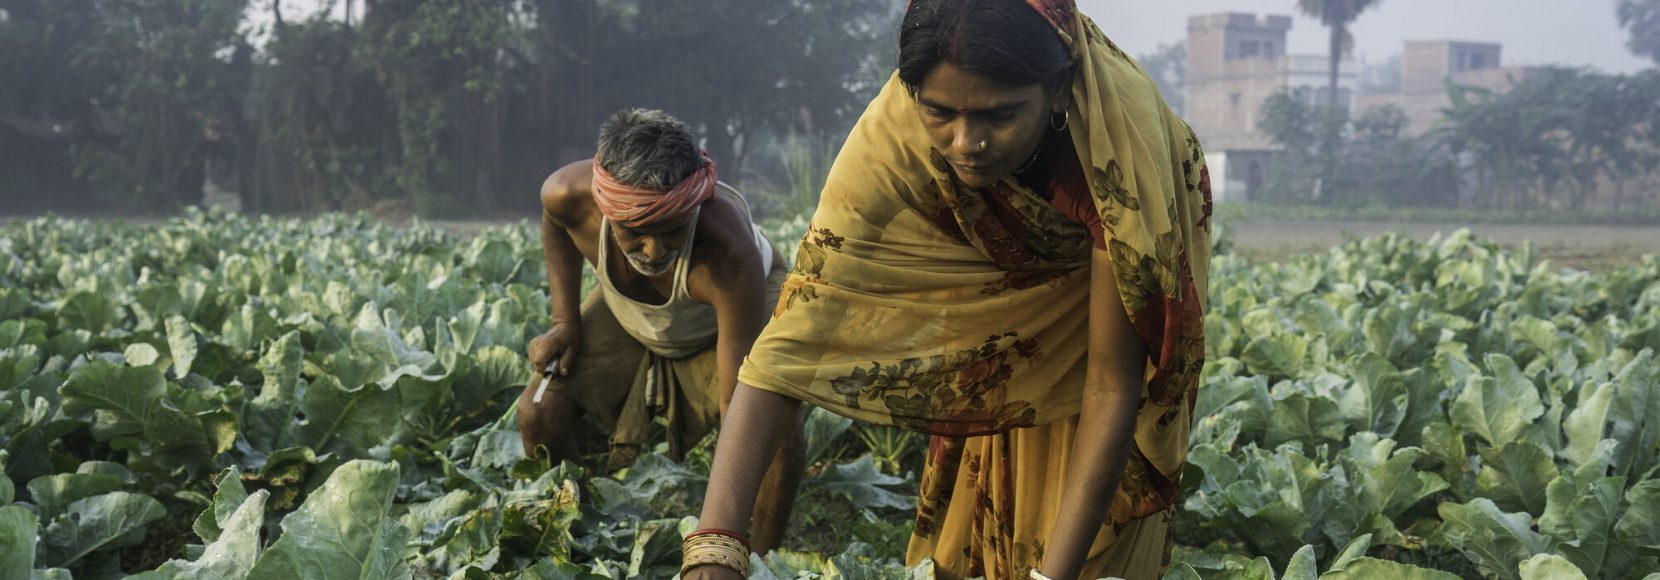 Vegetable farmer Geeta Devi (in orange), 45, a member of a Farmer's Producer Group, harvests cauliflower vegetables with her husband in her field in Machahi village, Muzaffarpur, Bihar, India on October 27th, 2016. Non-profit organisation Technoserve works with women vegetable farmers in Muzaffarpur, providing technical support in forward linkage, streamlining their business models and linking them directly to an international market through Electronic Trading Platforms. Photograph by Suzanne Lee for Technoserve